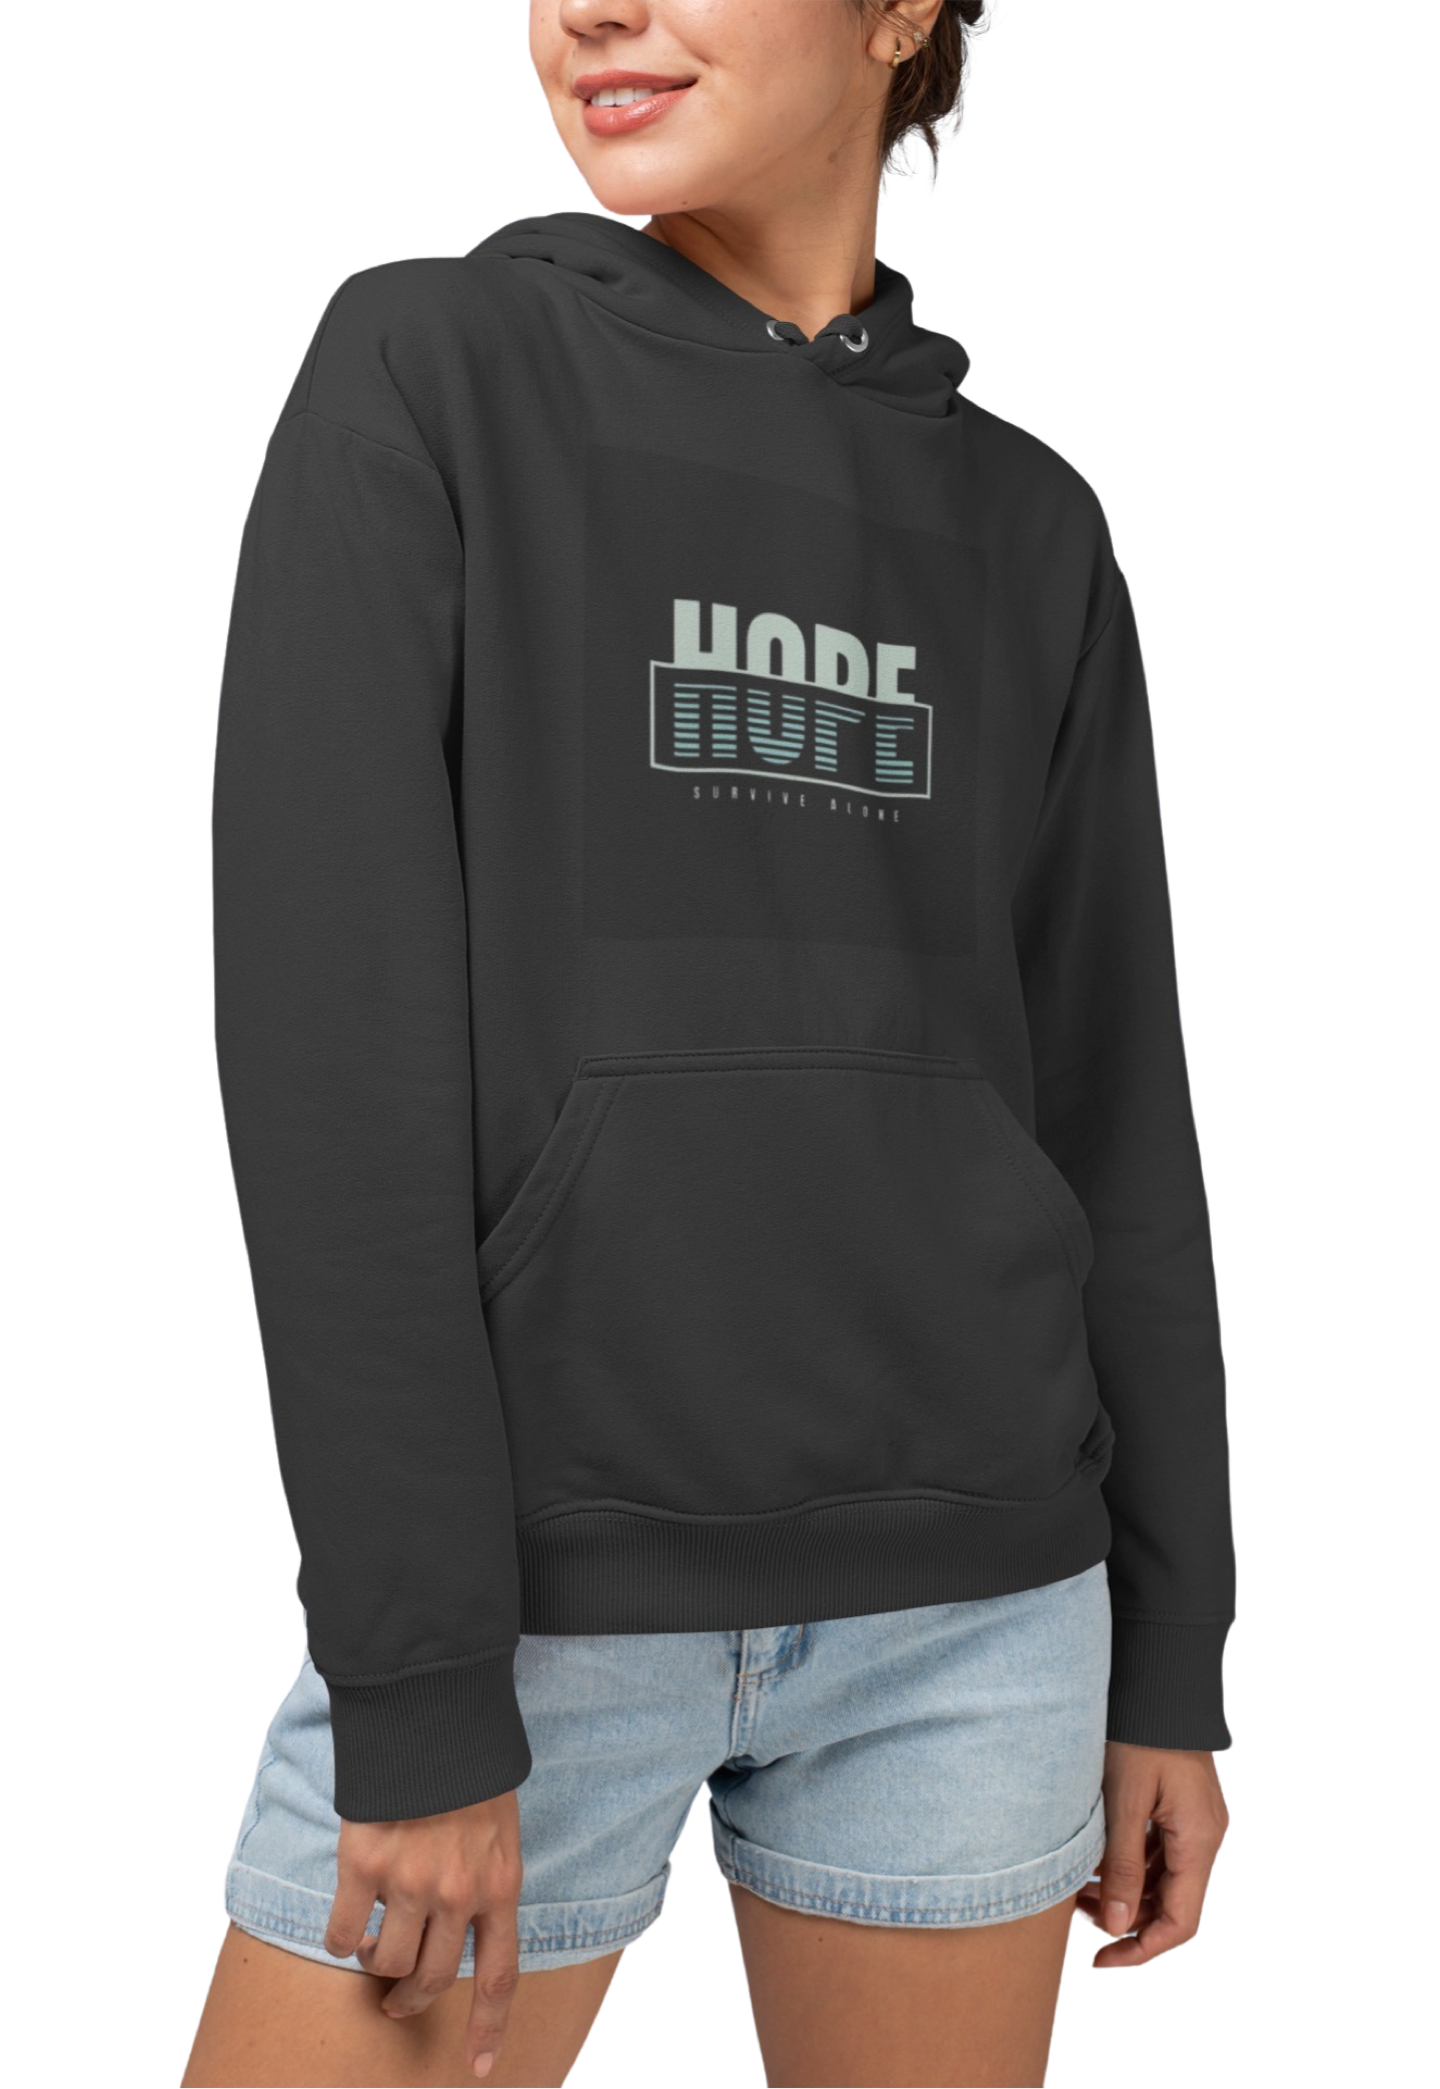 Women's 50% Cotton 50% Polyester HOPE Hoodie